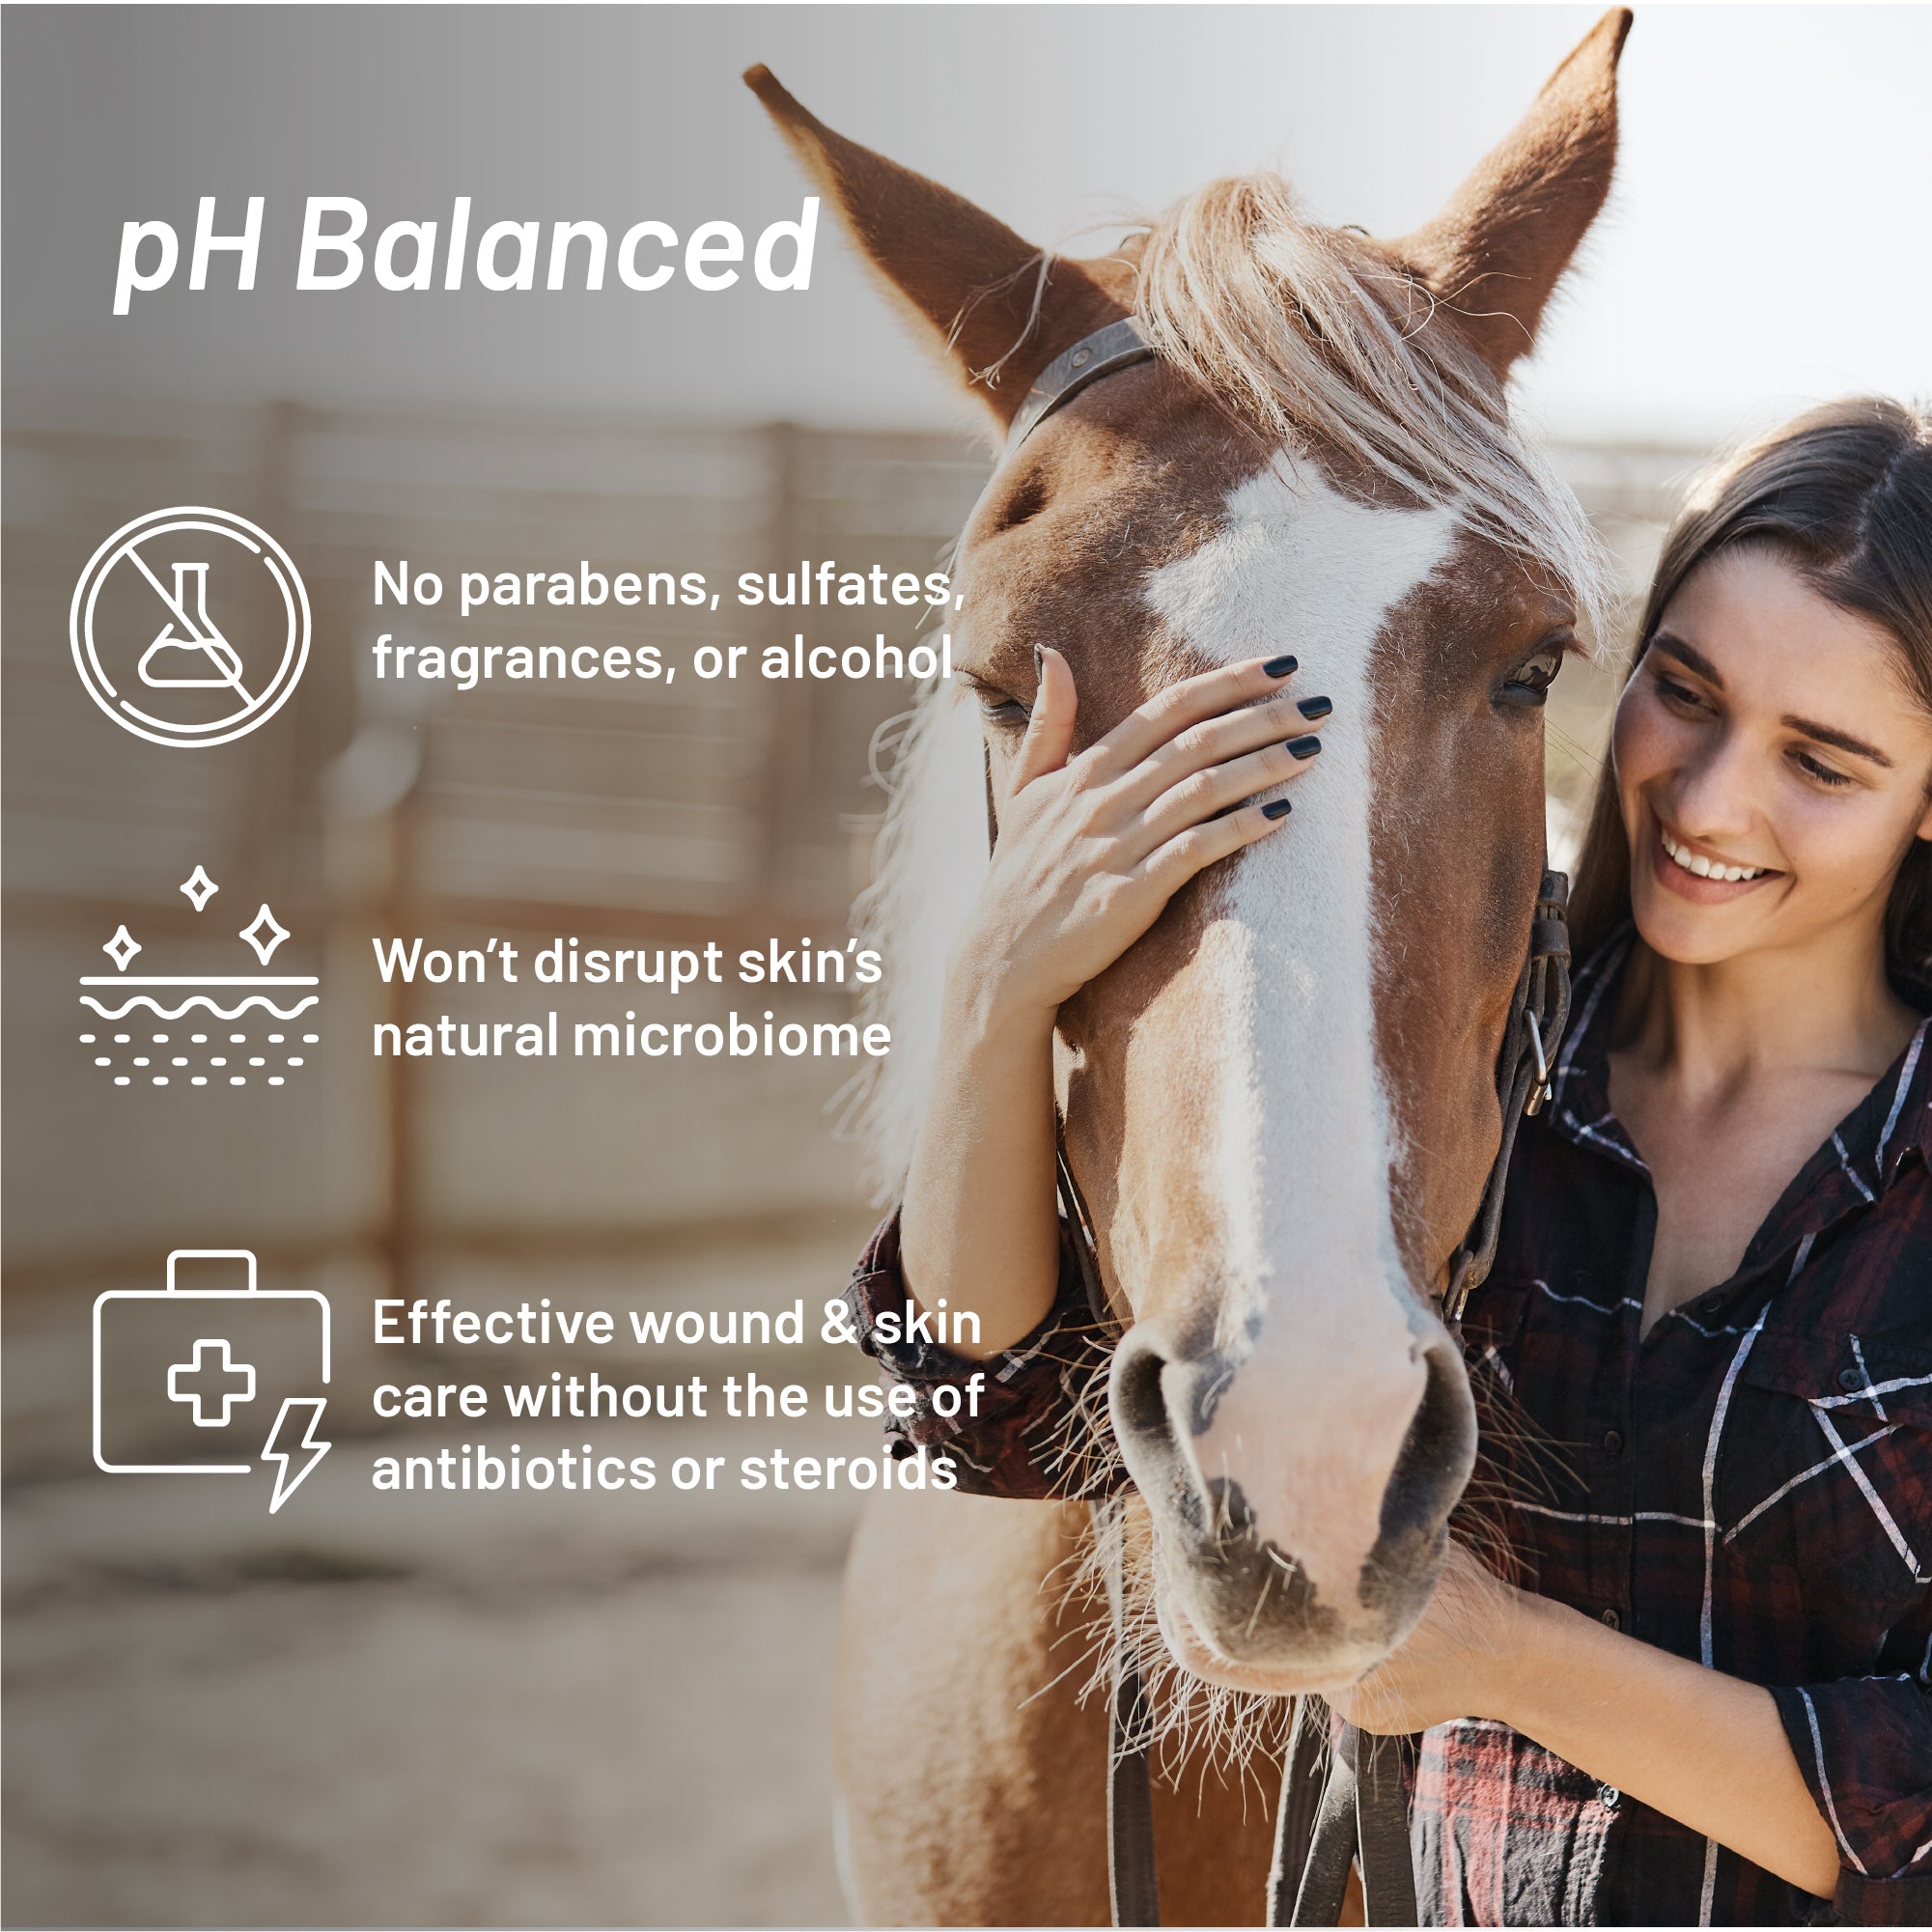 Woman in maroon flannel shirt holding the nose of a brown horse with a white nose.  Silver Honey pH balanced, no parabens, sulfates, fragrances, or alcohol.  Won't disrupt skin's natural microbiome.  Effective wound & skin care without the use of antibiotics or steroids.